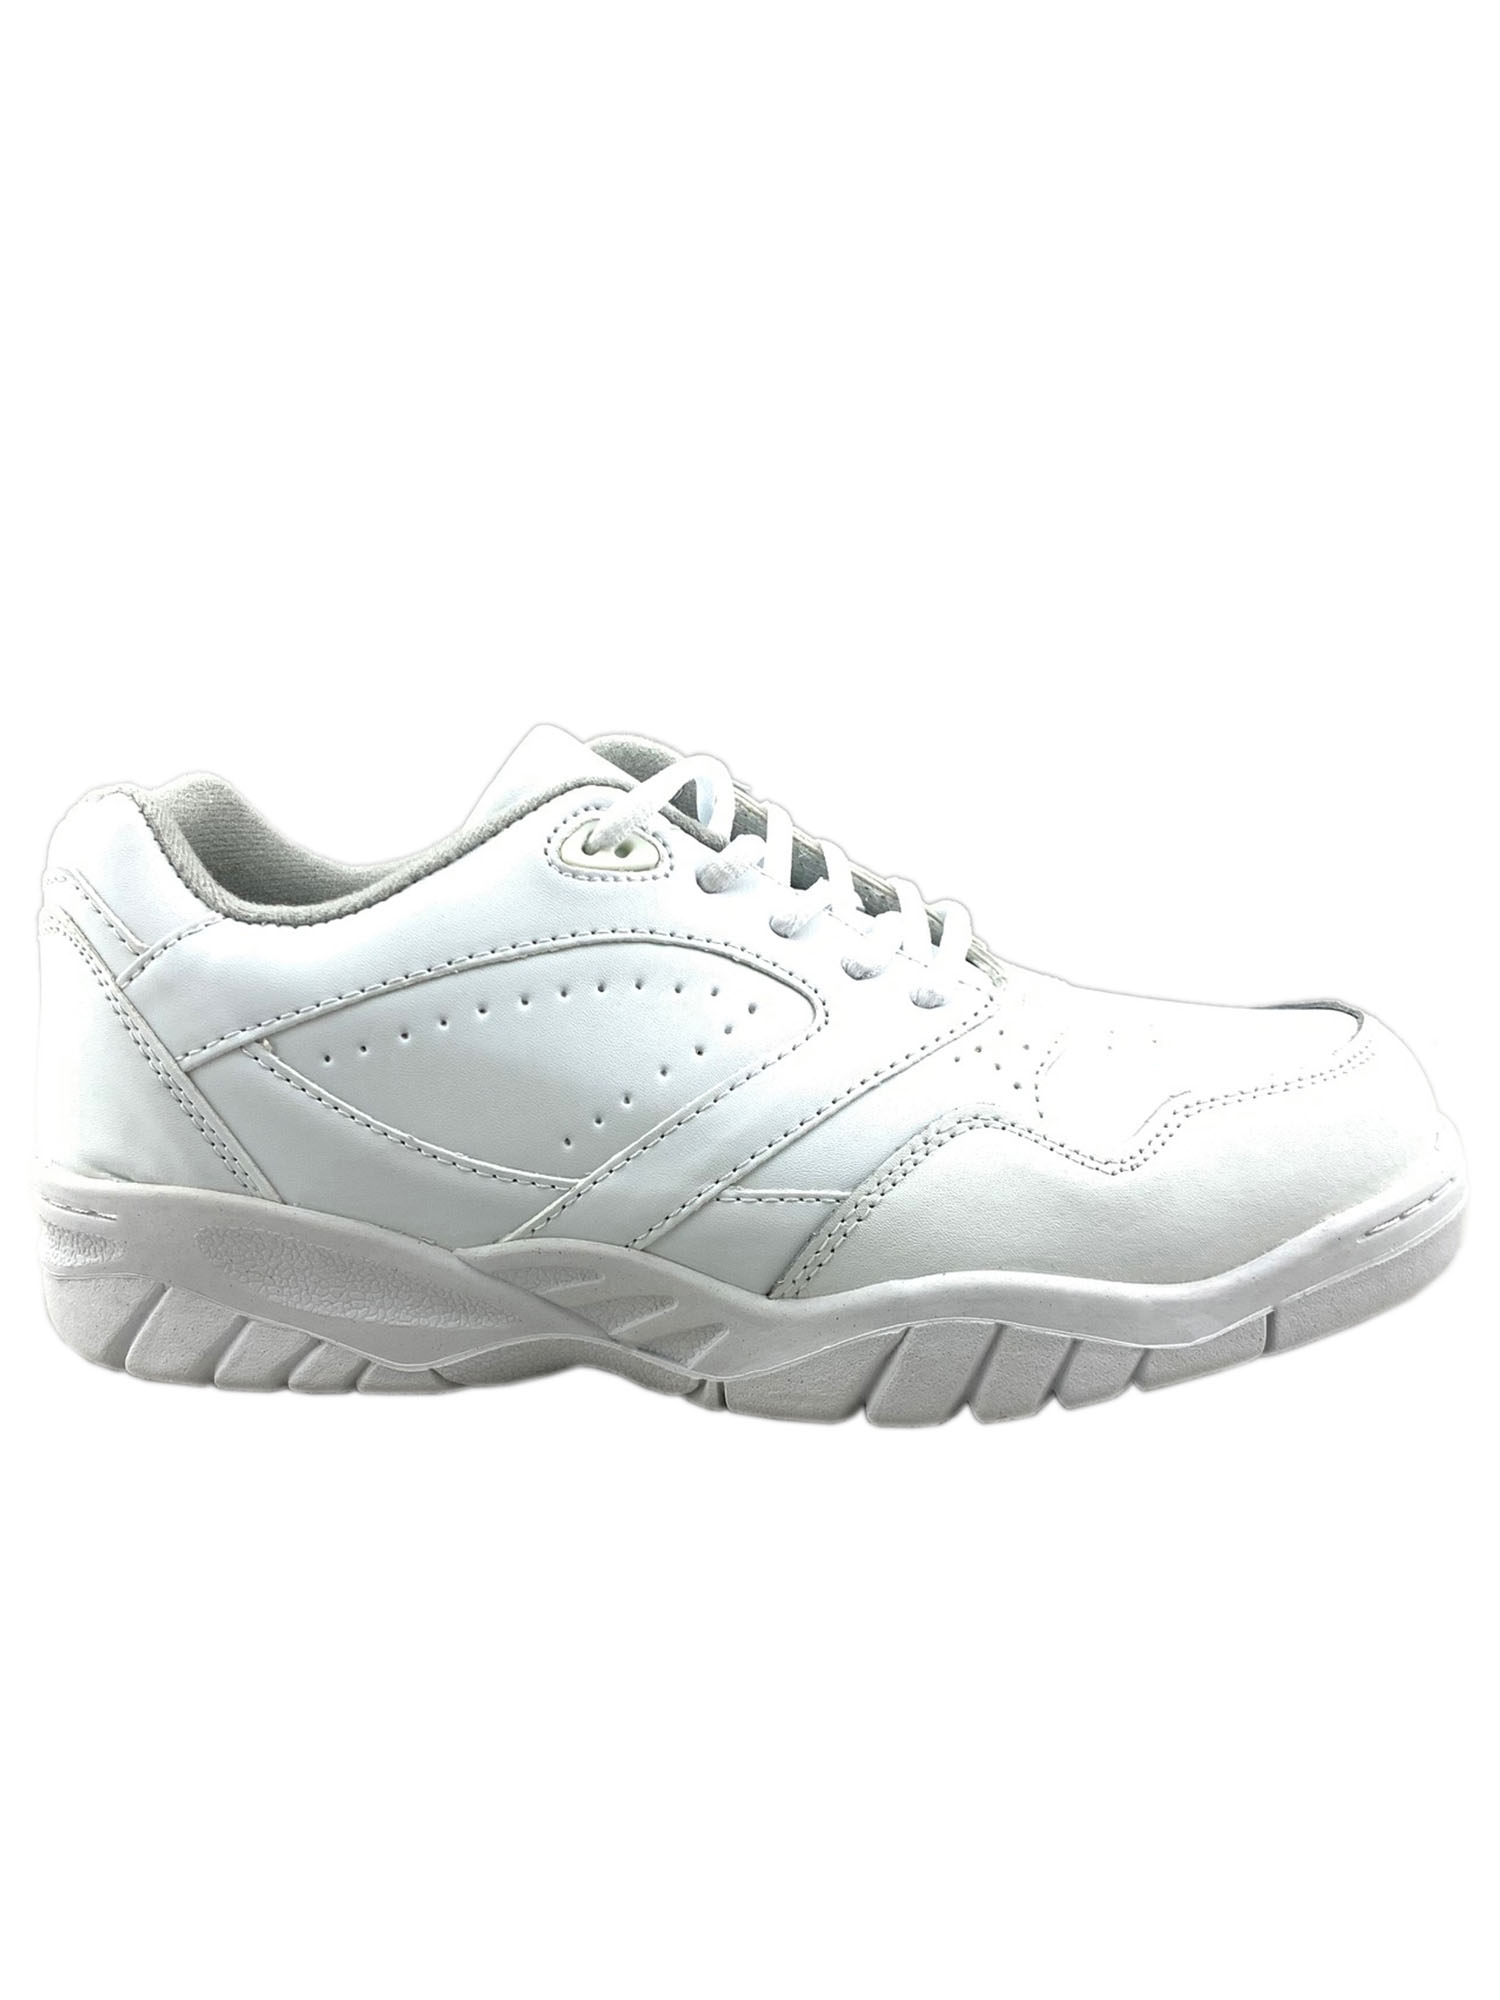 Tanleewa Men's Leather White Sports Shoes Lightweight Sneakers Breathable Casual Shoe Size 6.5 - image 1 of 5